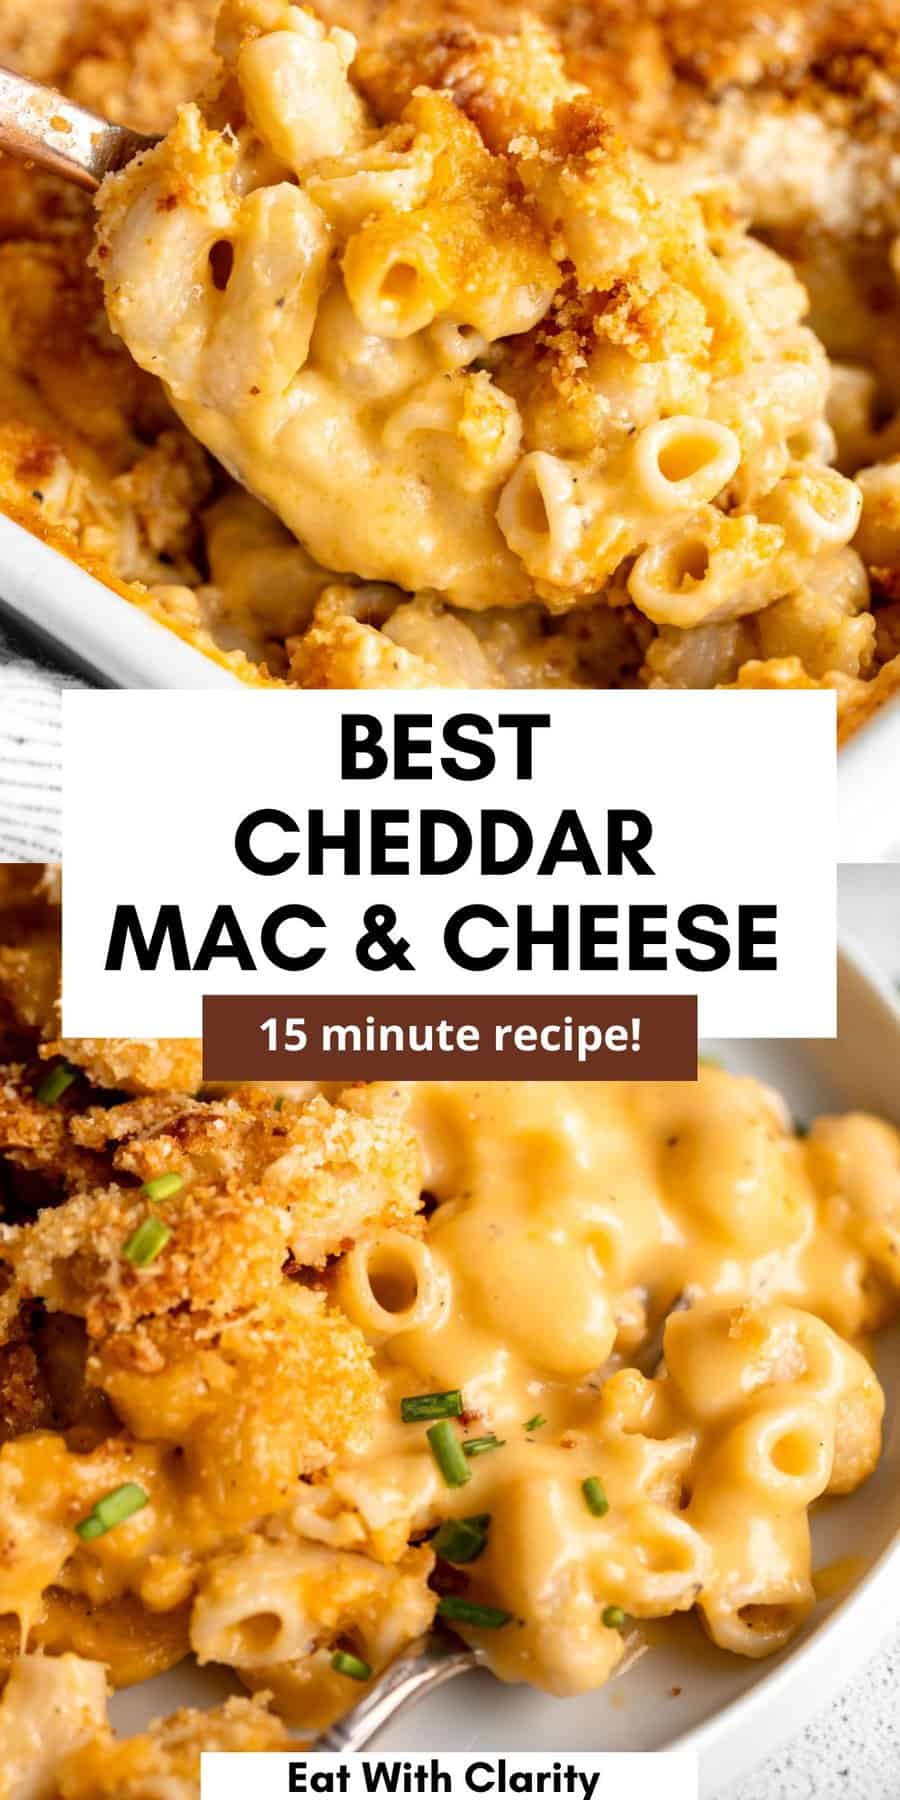 Gluten Free Mac and Cheese - Eat With Clarity